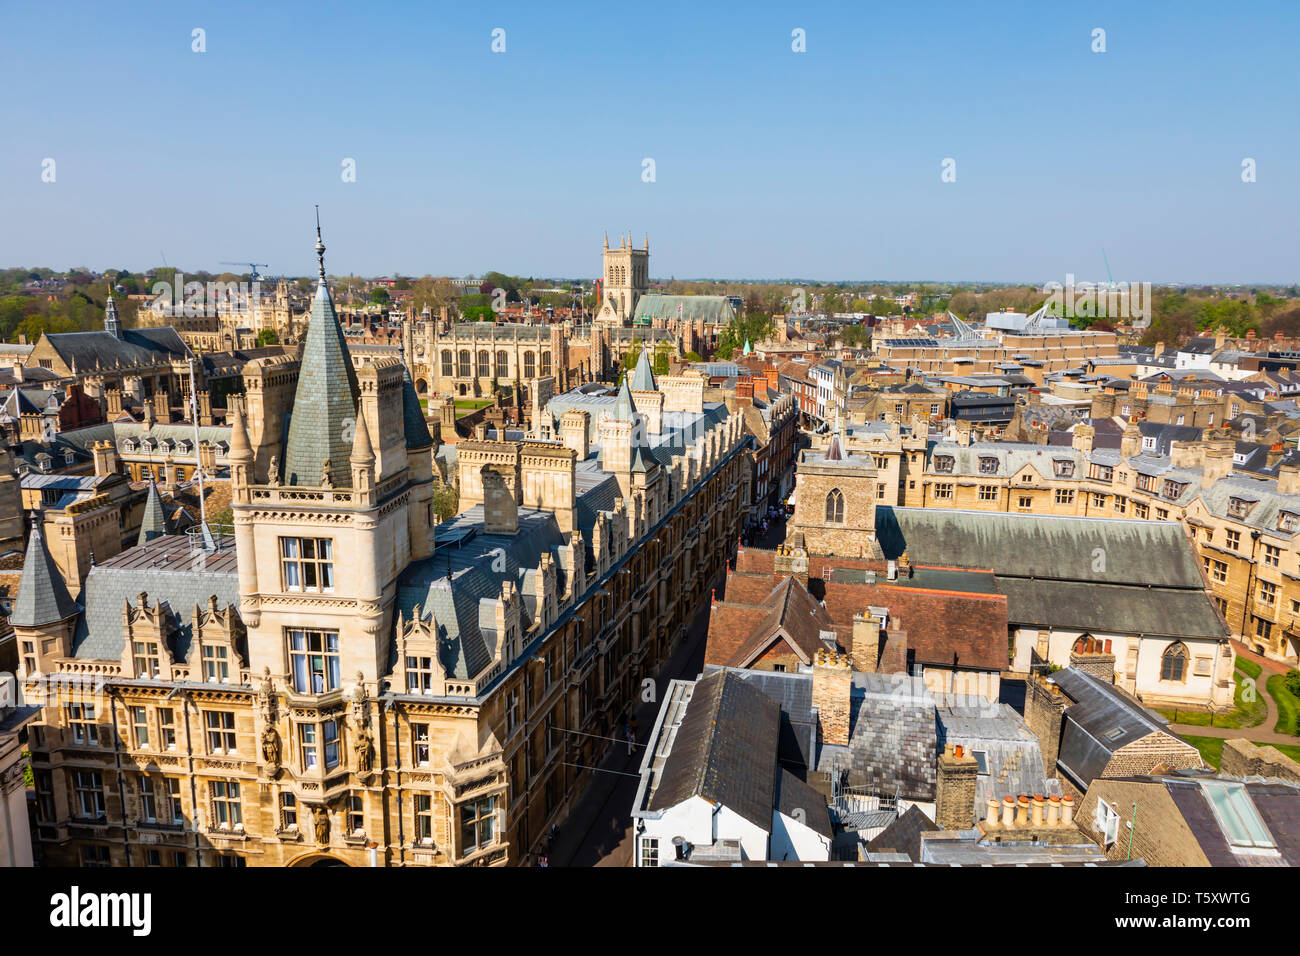 Gonville and Caius college seen from St Marys church tower, University town of Cambridge, Cambridgeshire, England Stock Photo